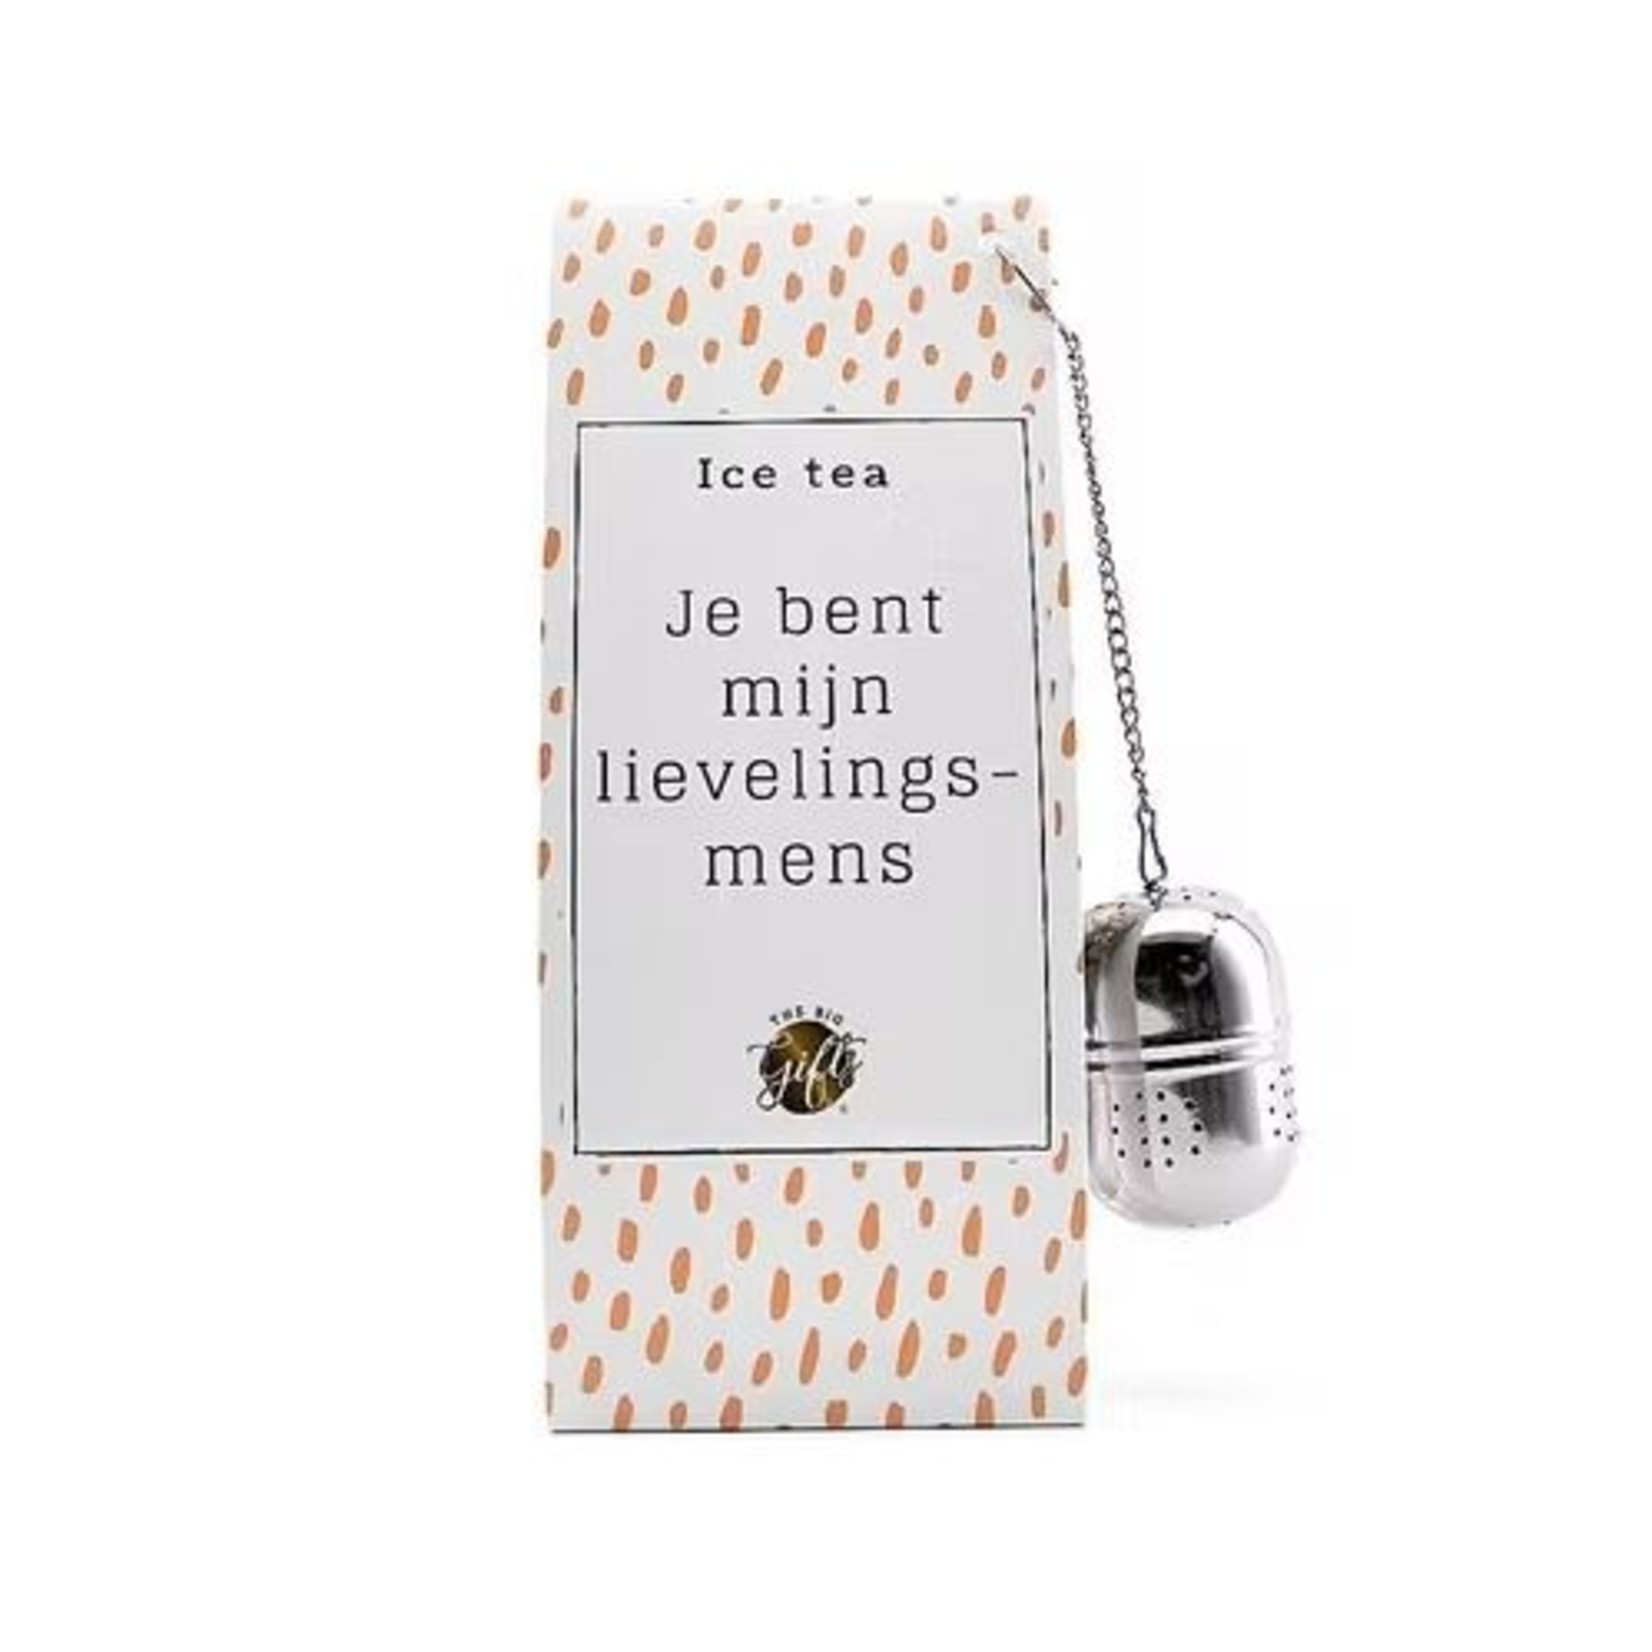 Eve's Gifts Lievelingsmens- Zomaar - Gift Box